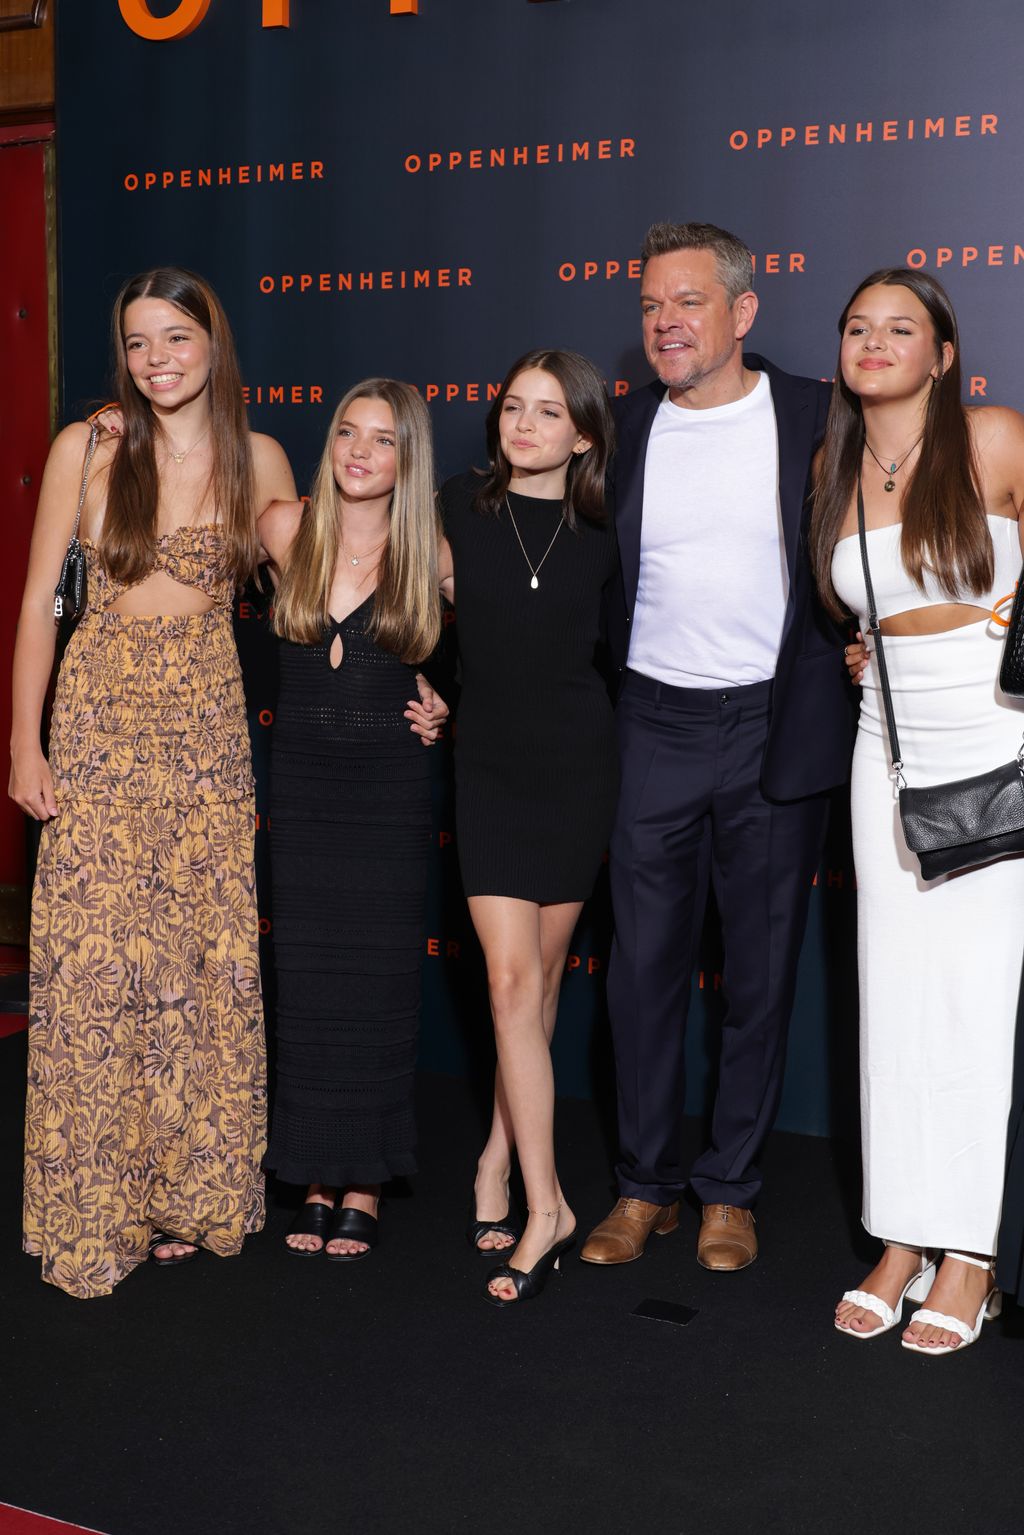 Matt Damon with his daughters Alexia Damon, Isabella Damon, Gia Damon and Stella Damon attend the "Oppenheimer" premiere at Cinema Le Grand Rex on July 11, 2023 in Paris, France